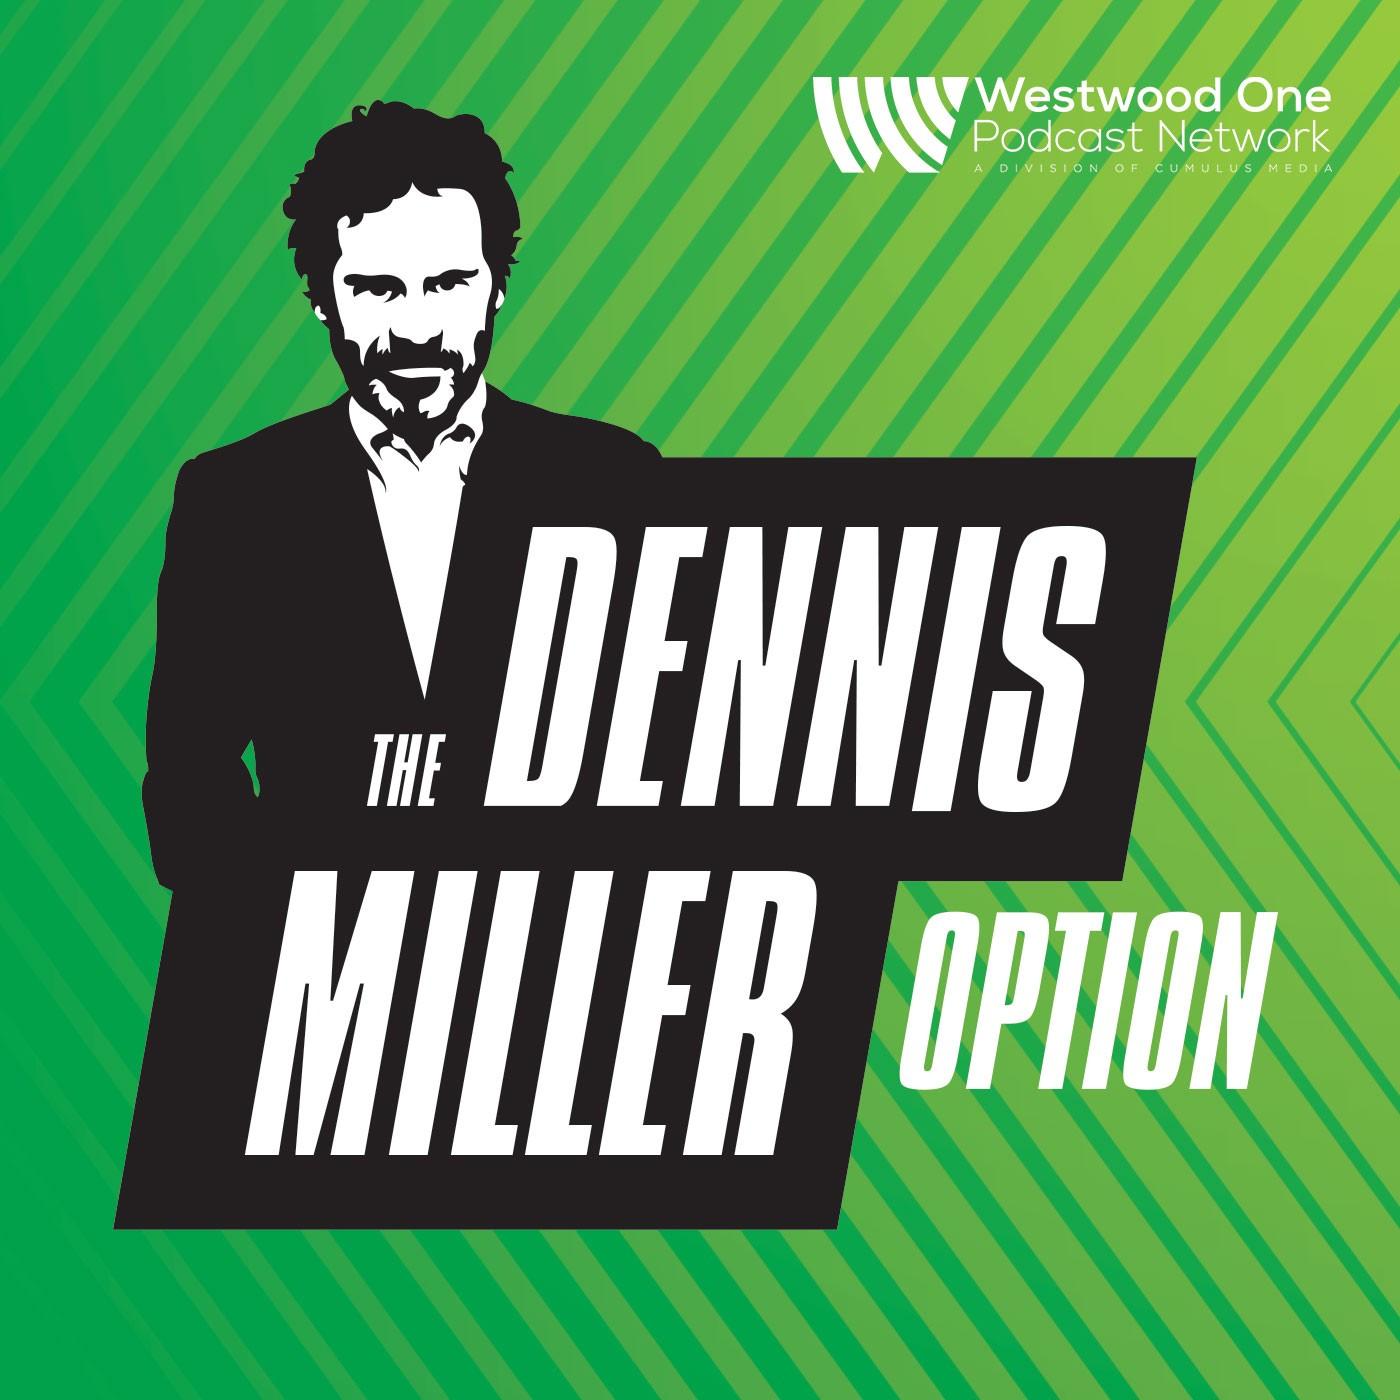 THE DENNIS MILLER OPTION” TO AIR EXCLUSIVELY ON WESTWOOD ONE PODCAST NETWORK